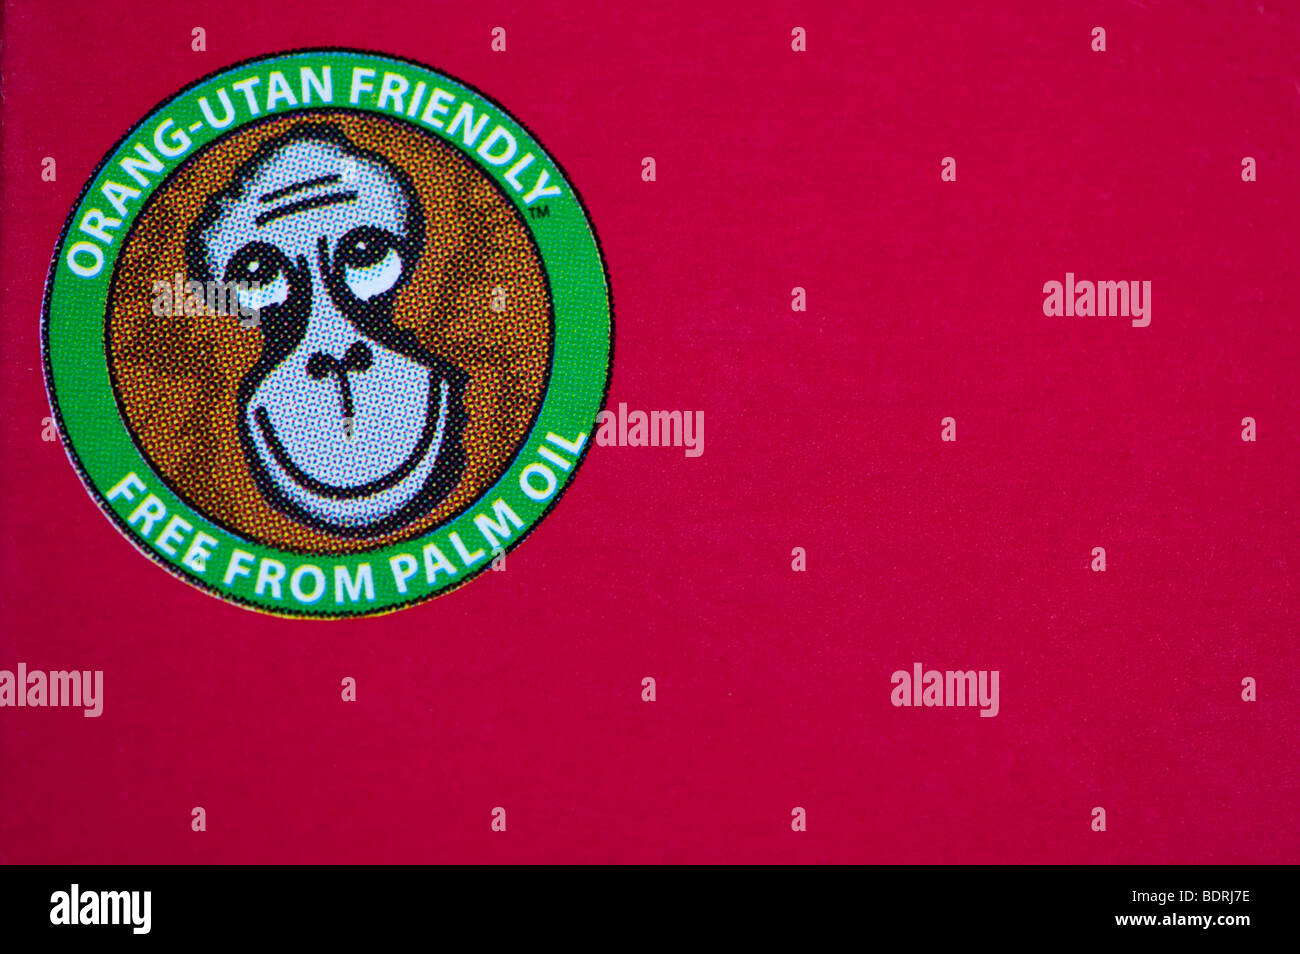 Orang-Utan Friendly, Free from palm oil food packaging advice label Stock Photo